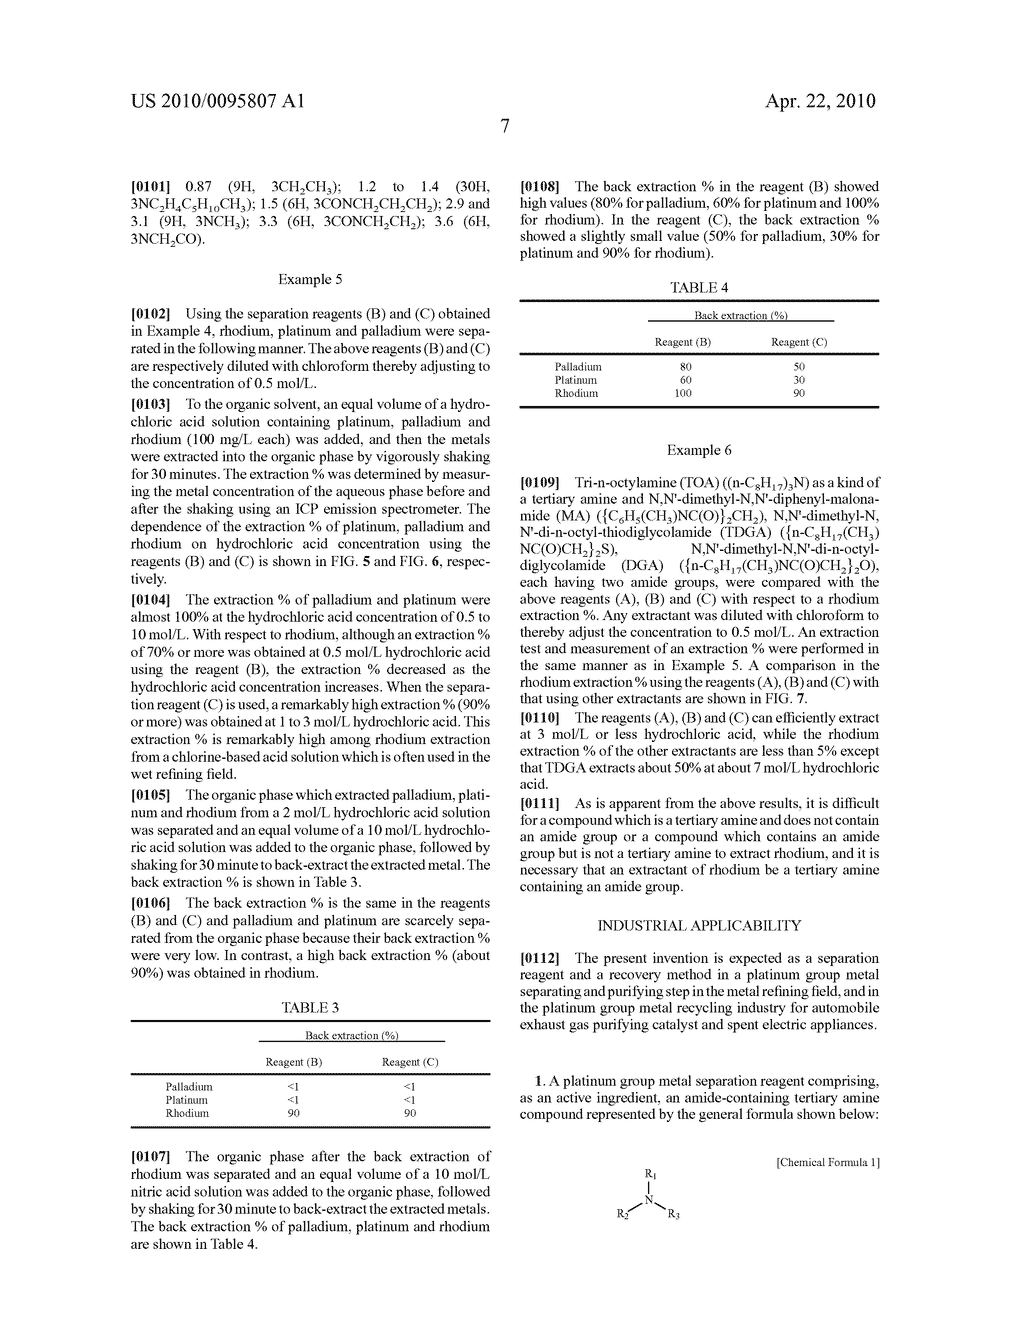 SEPARATION REAGENT OF PLATINUM GROUP METAL, METHOD FOR SEPARATING AND RECOVERING PLATINUM GROUP METAL, AND AMIDE-CONTAINING TERTIARY AMINE COMPOUND - diagram, schematic, and image 13